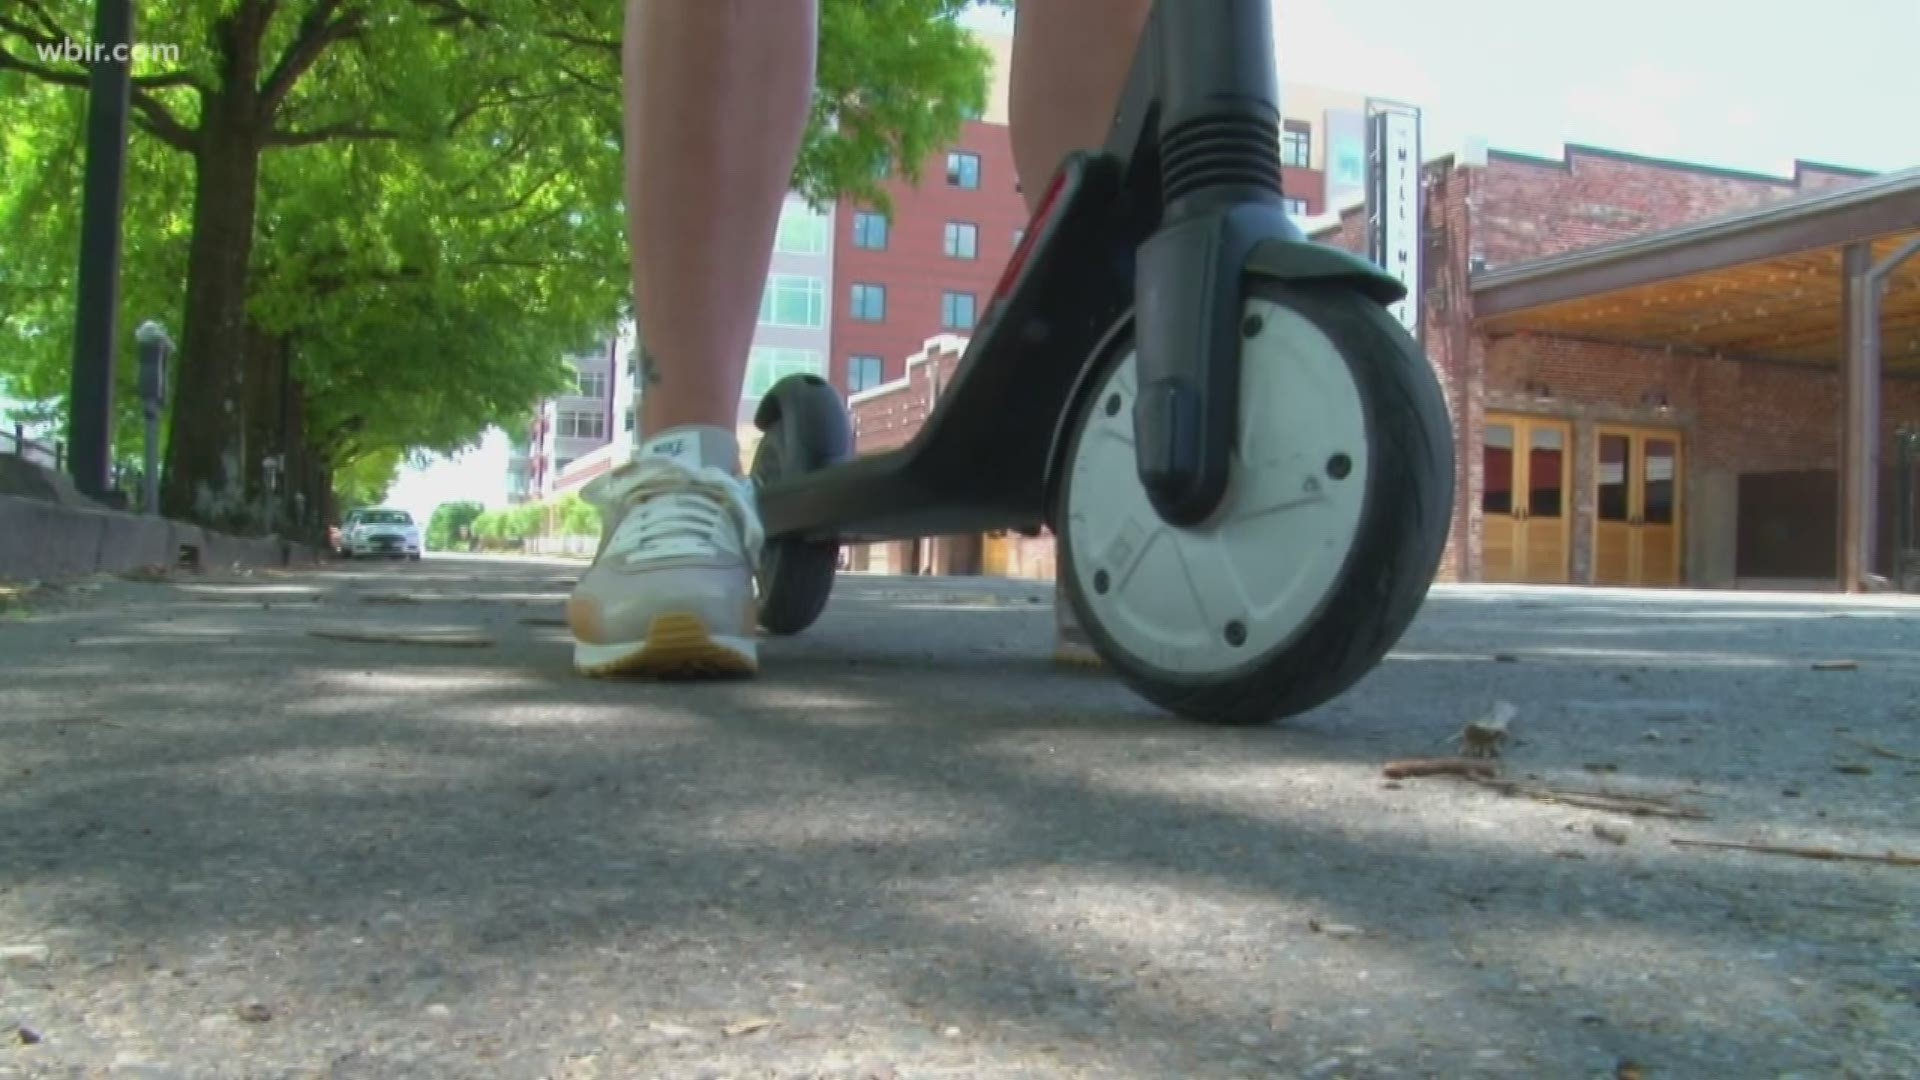 The city plans to implement a time limit on the scooters so people can only ride them from 7 a.m. to 9 p.m., saying they hope it will help curb unsafe behaviors.